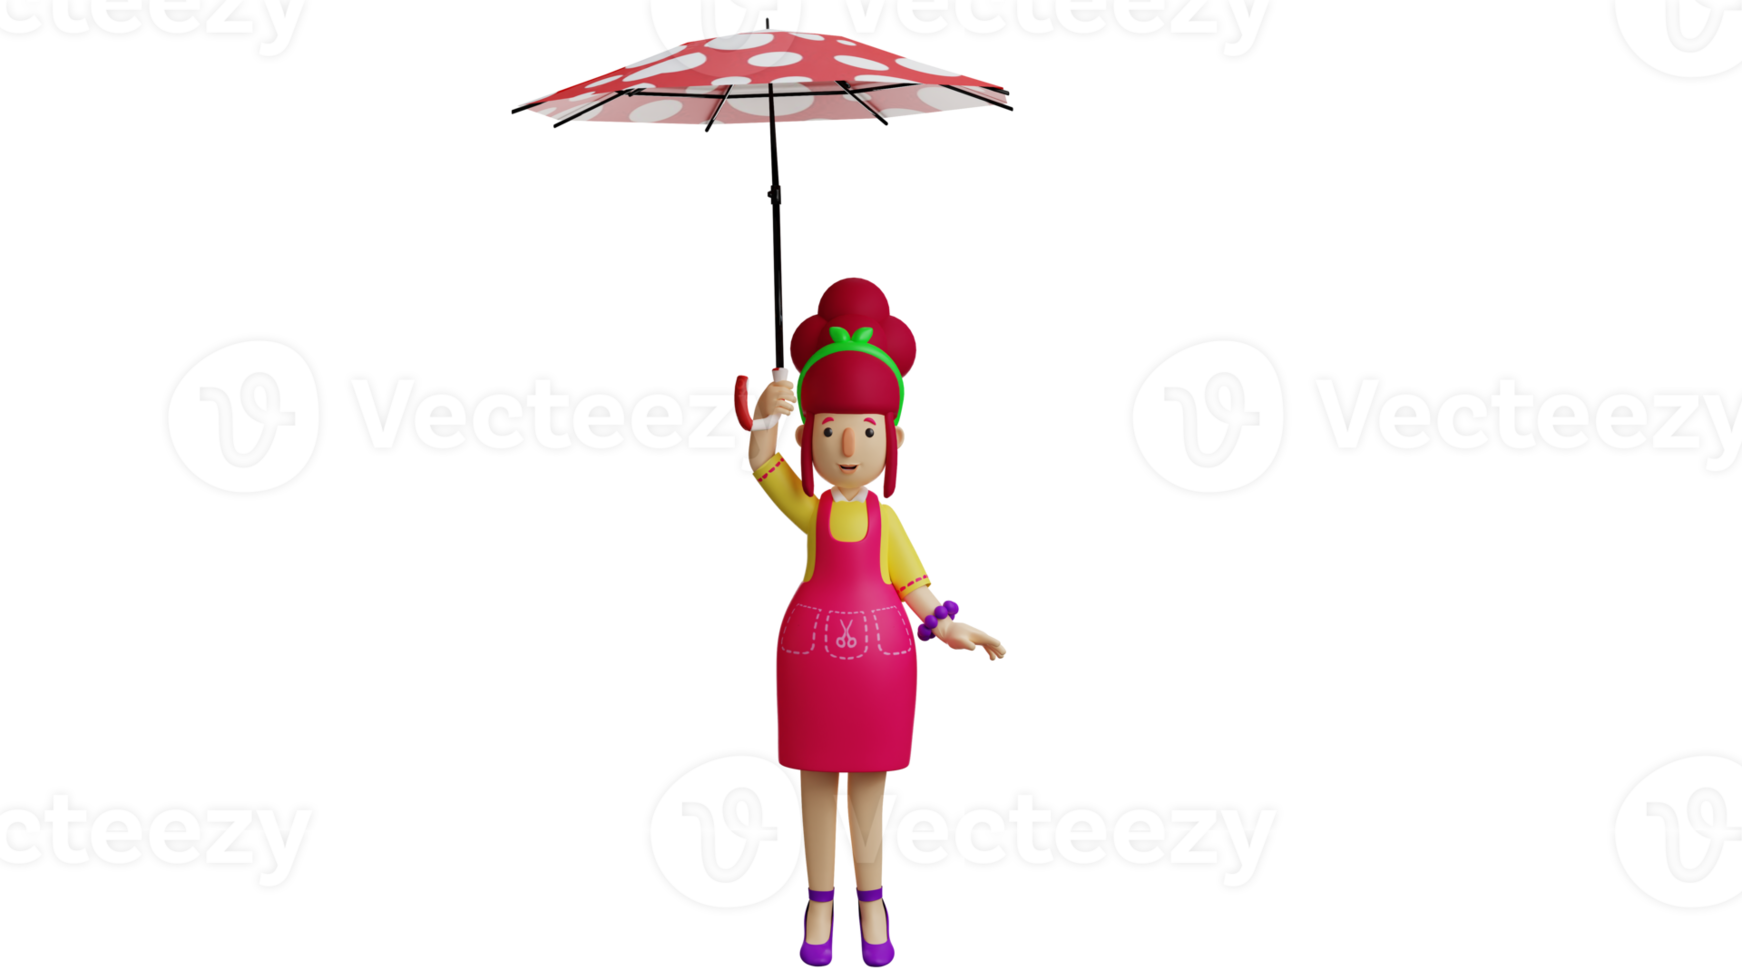 3D illustration. Beautiful Waitress 3D Cartoon Character. Young mother is holding a red umbrella. Friendly waitress brings umbrella. Beautiful woman carrying polka dot umbrella. 3D Cartoon Character png